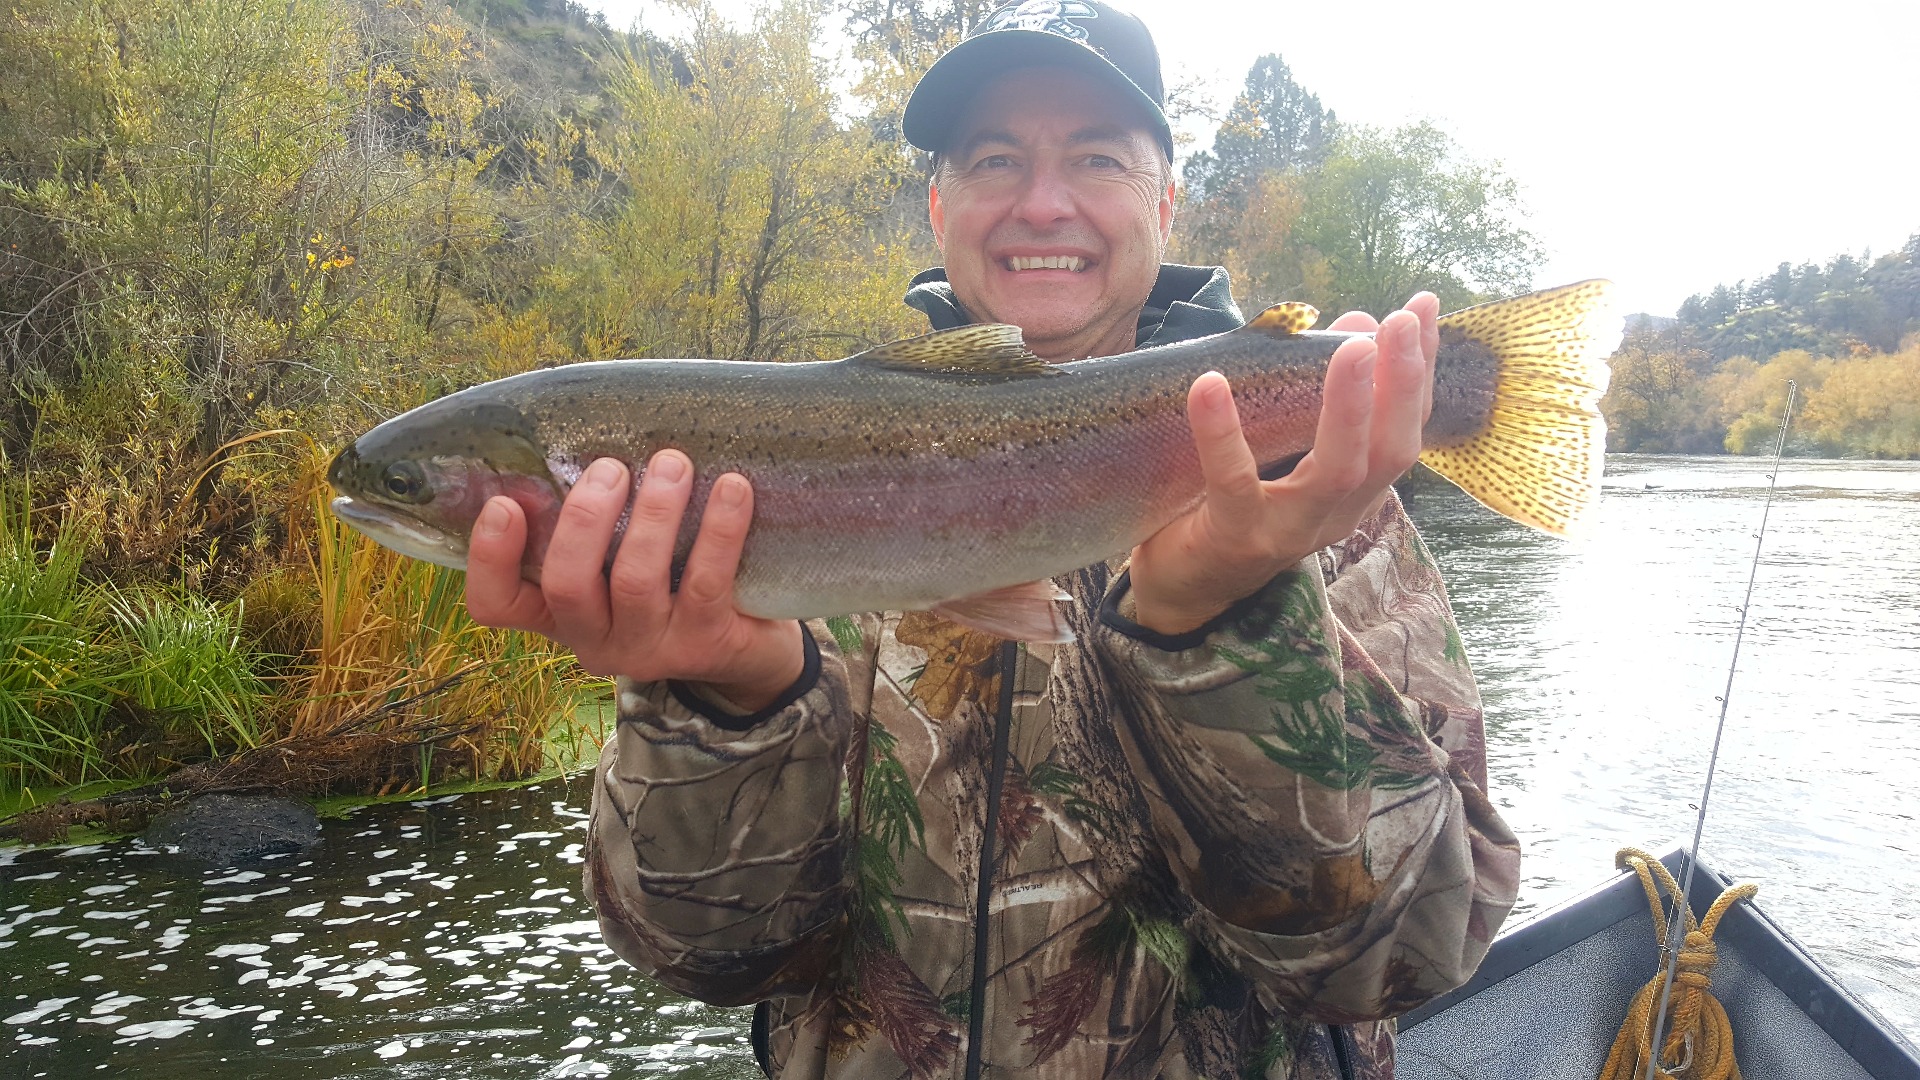 Ugly weather is what Winter Steelhead fishing is all about